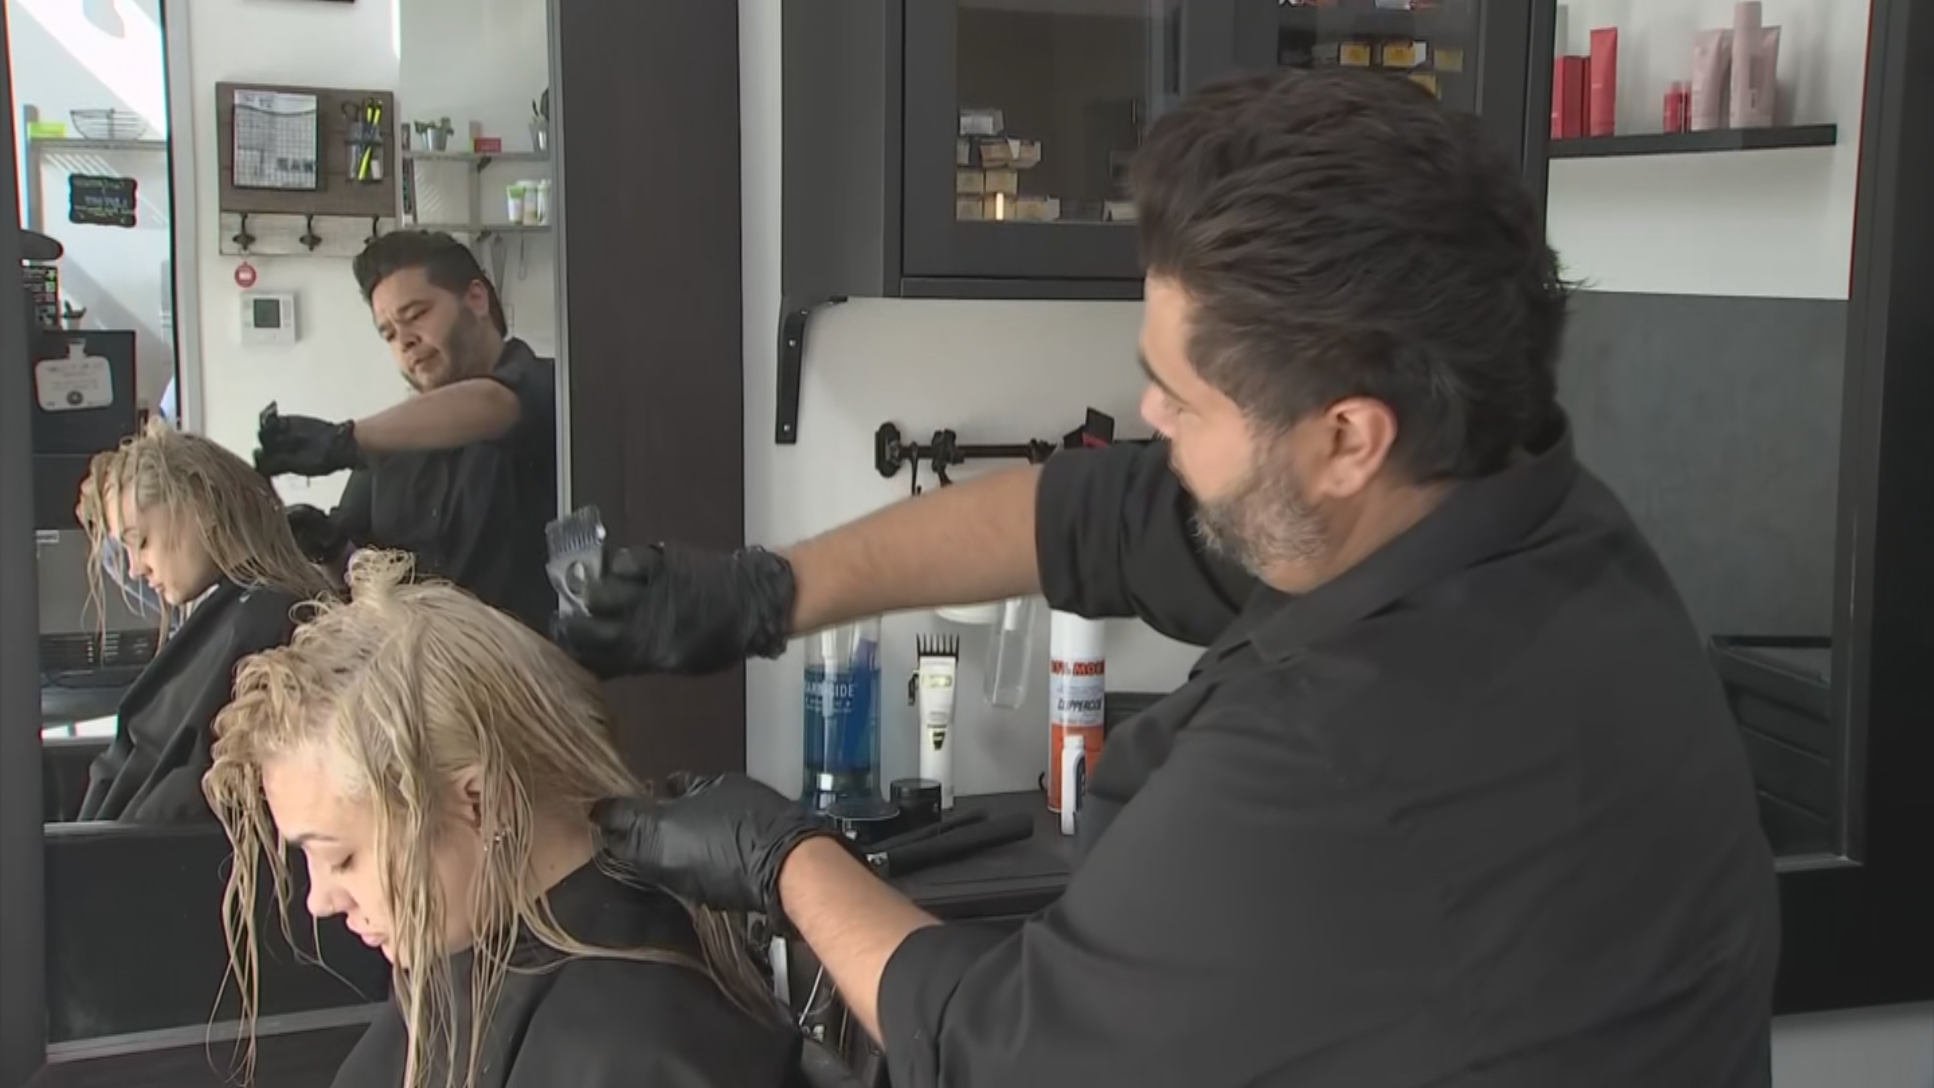 AZ hairstylists, salon business owners struggle to pay rent due to COVID-19